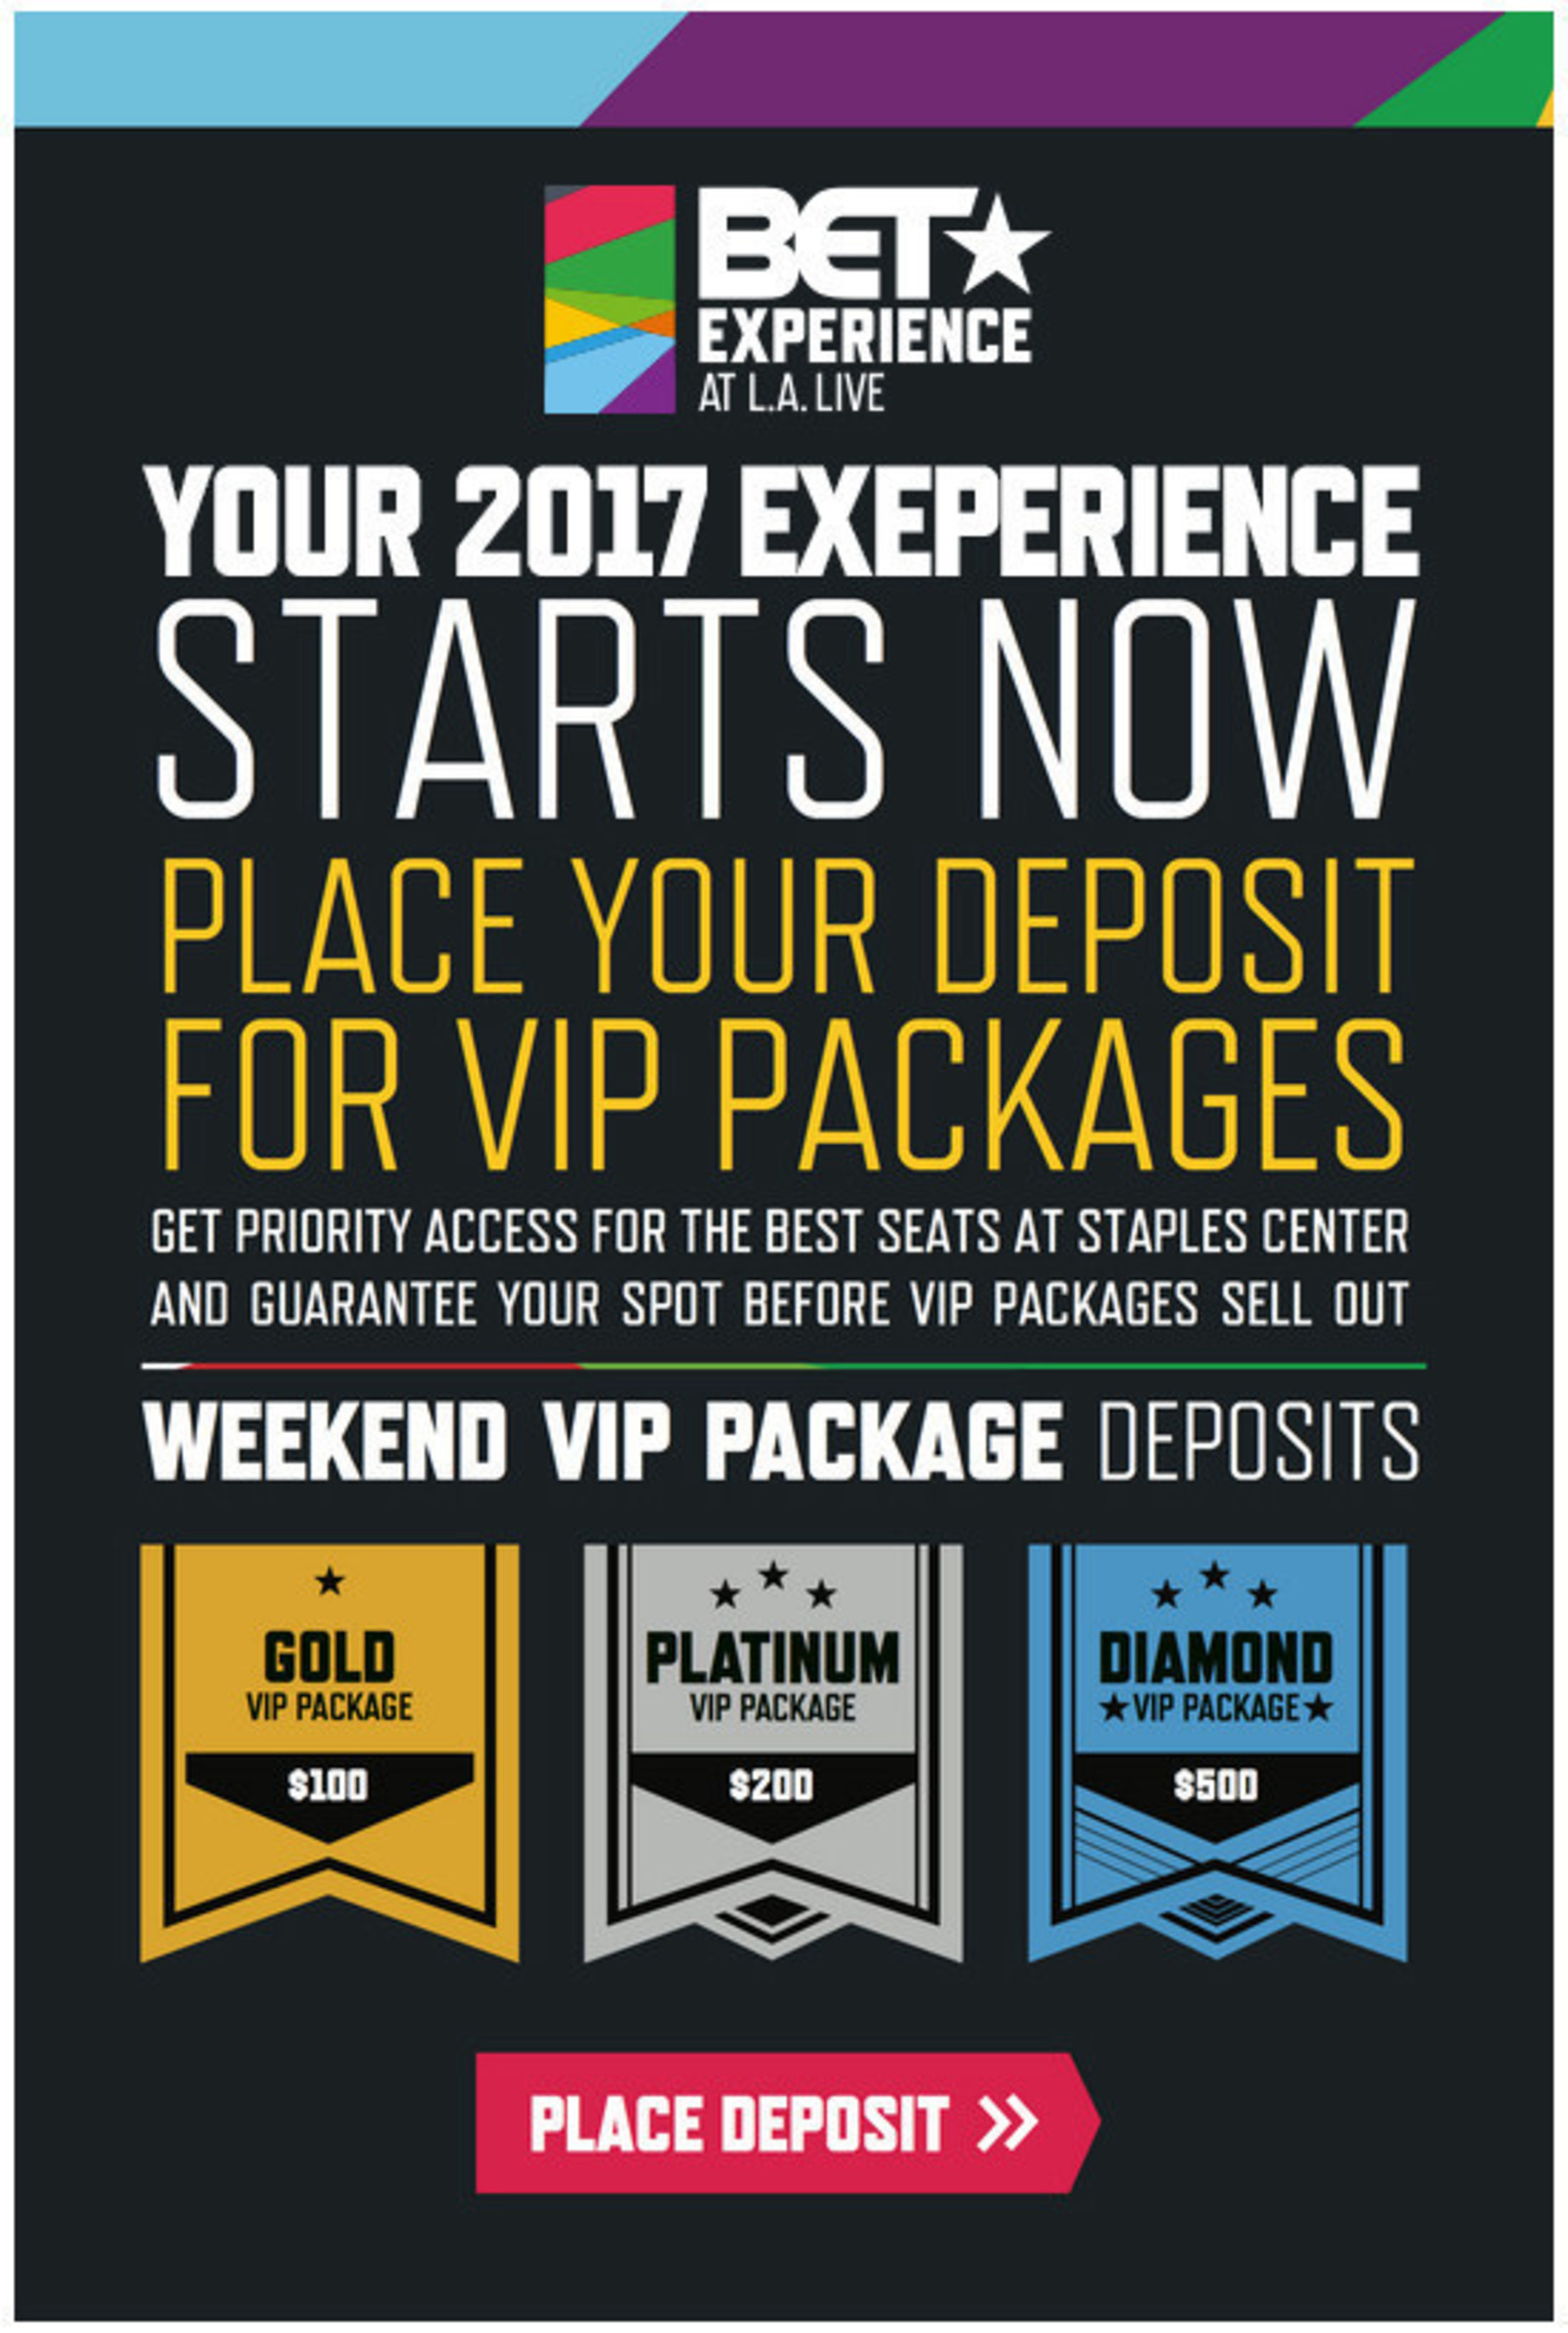 2017 BET Experience VIP Packages on sale now